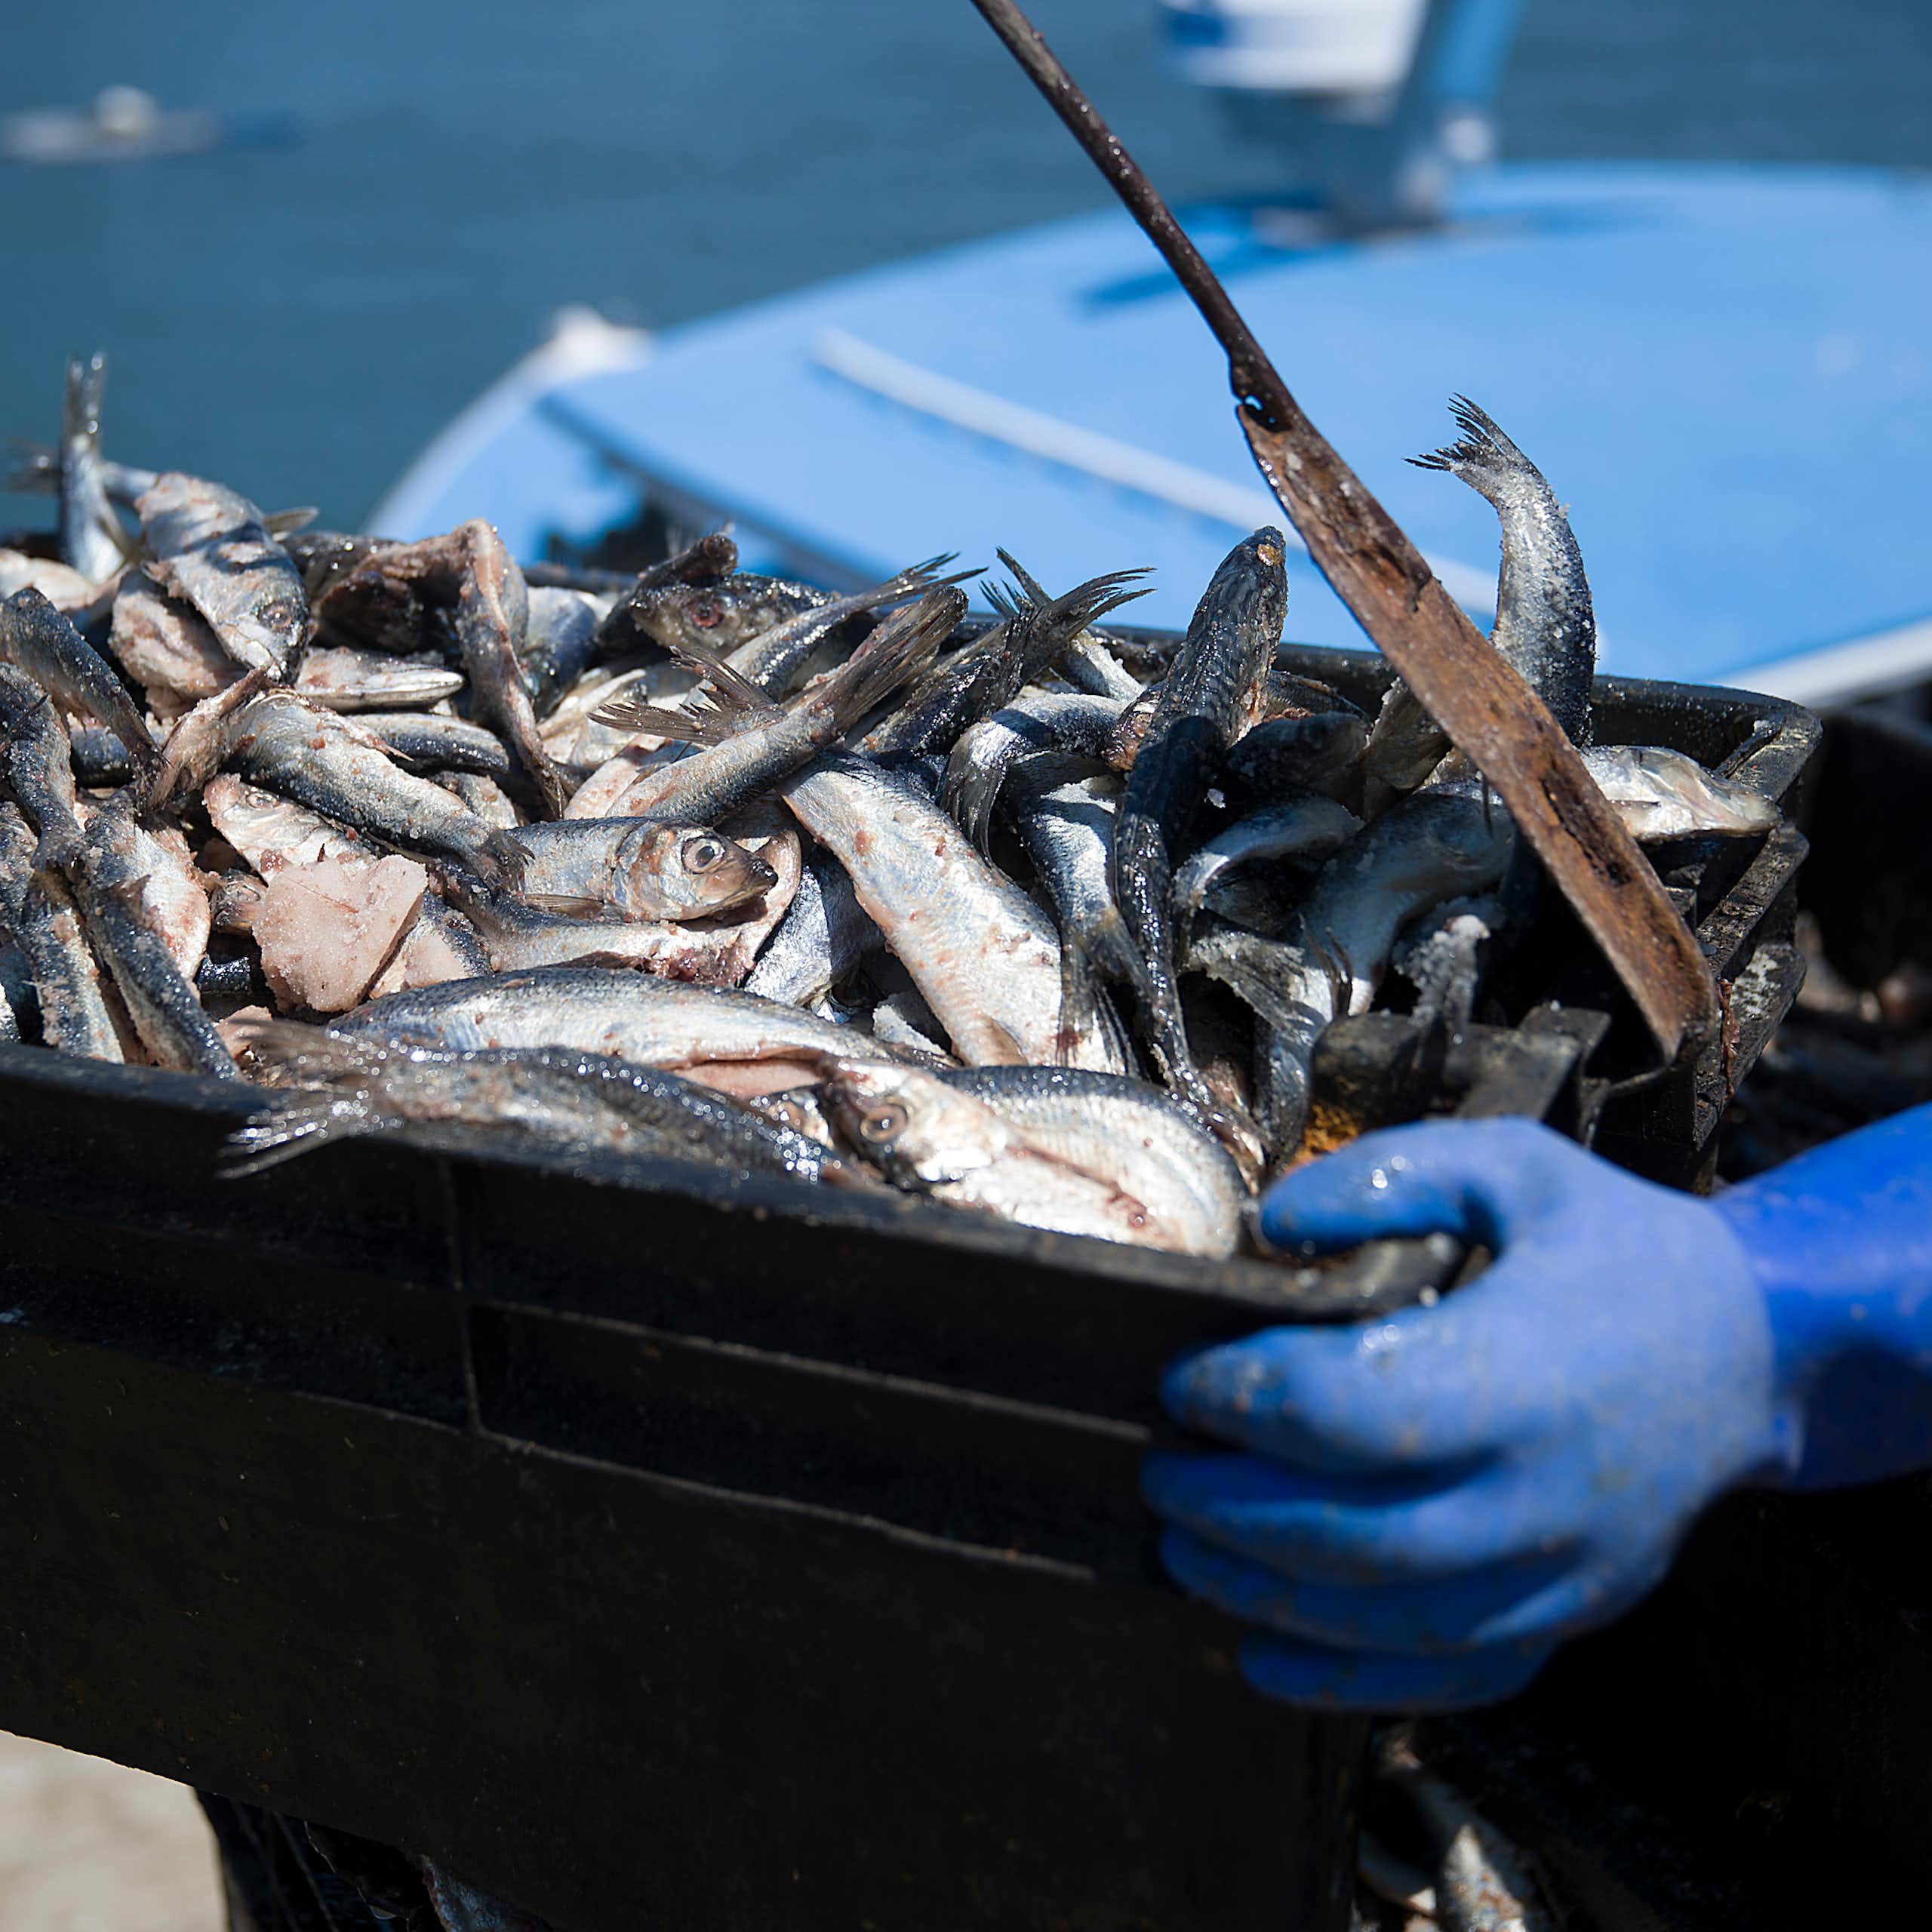 A bin filled with herring aboard a fishing boat